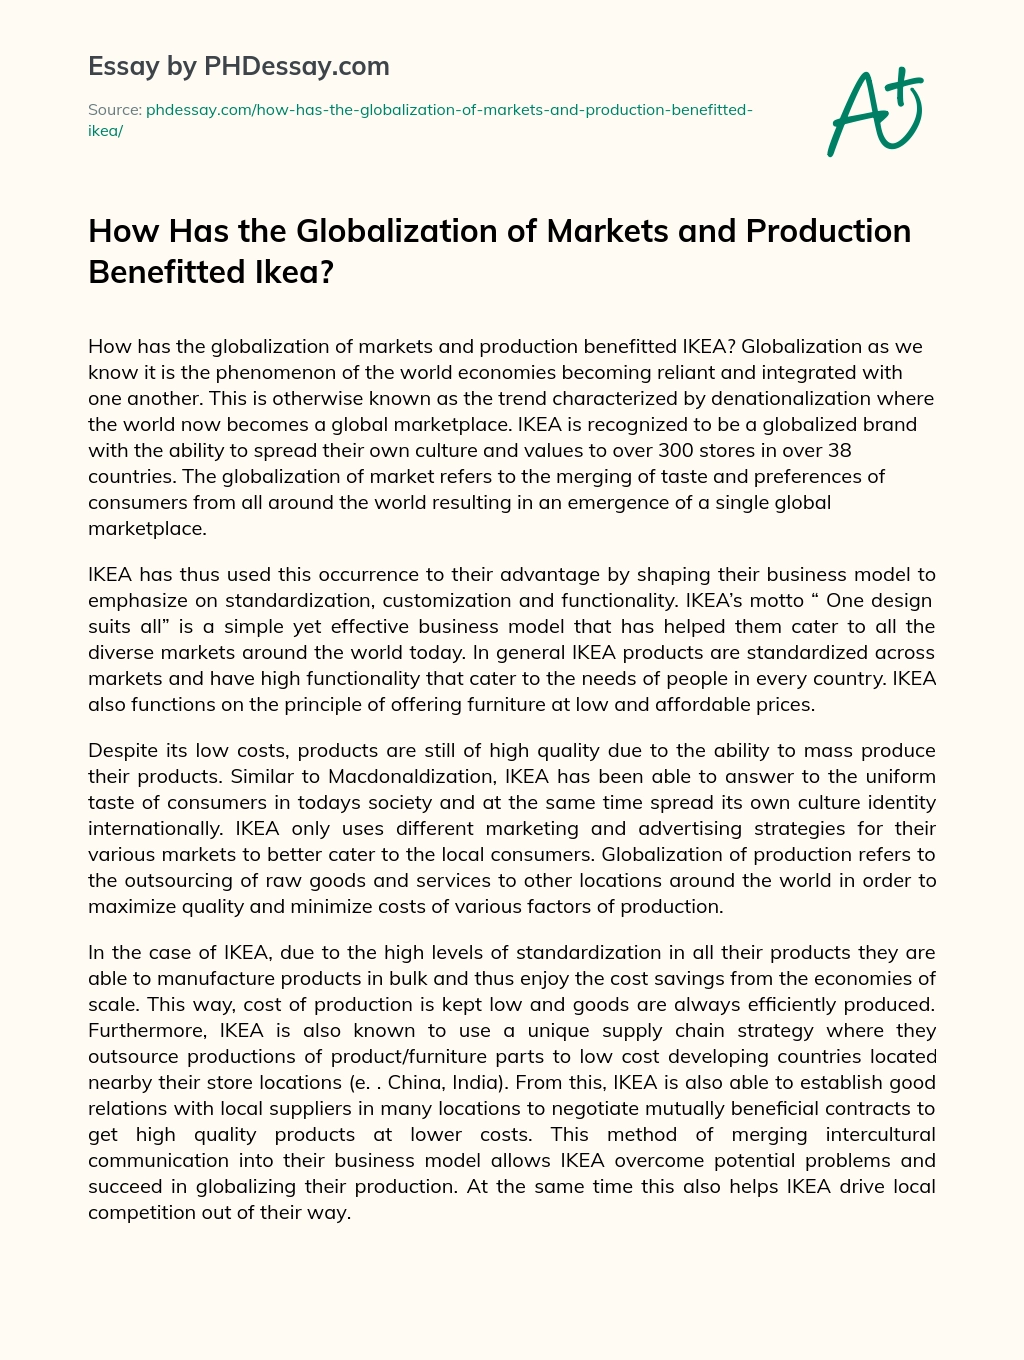 How Has the Globalization of Markets and Production Benefitted Ikea? essay